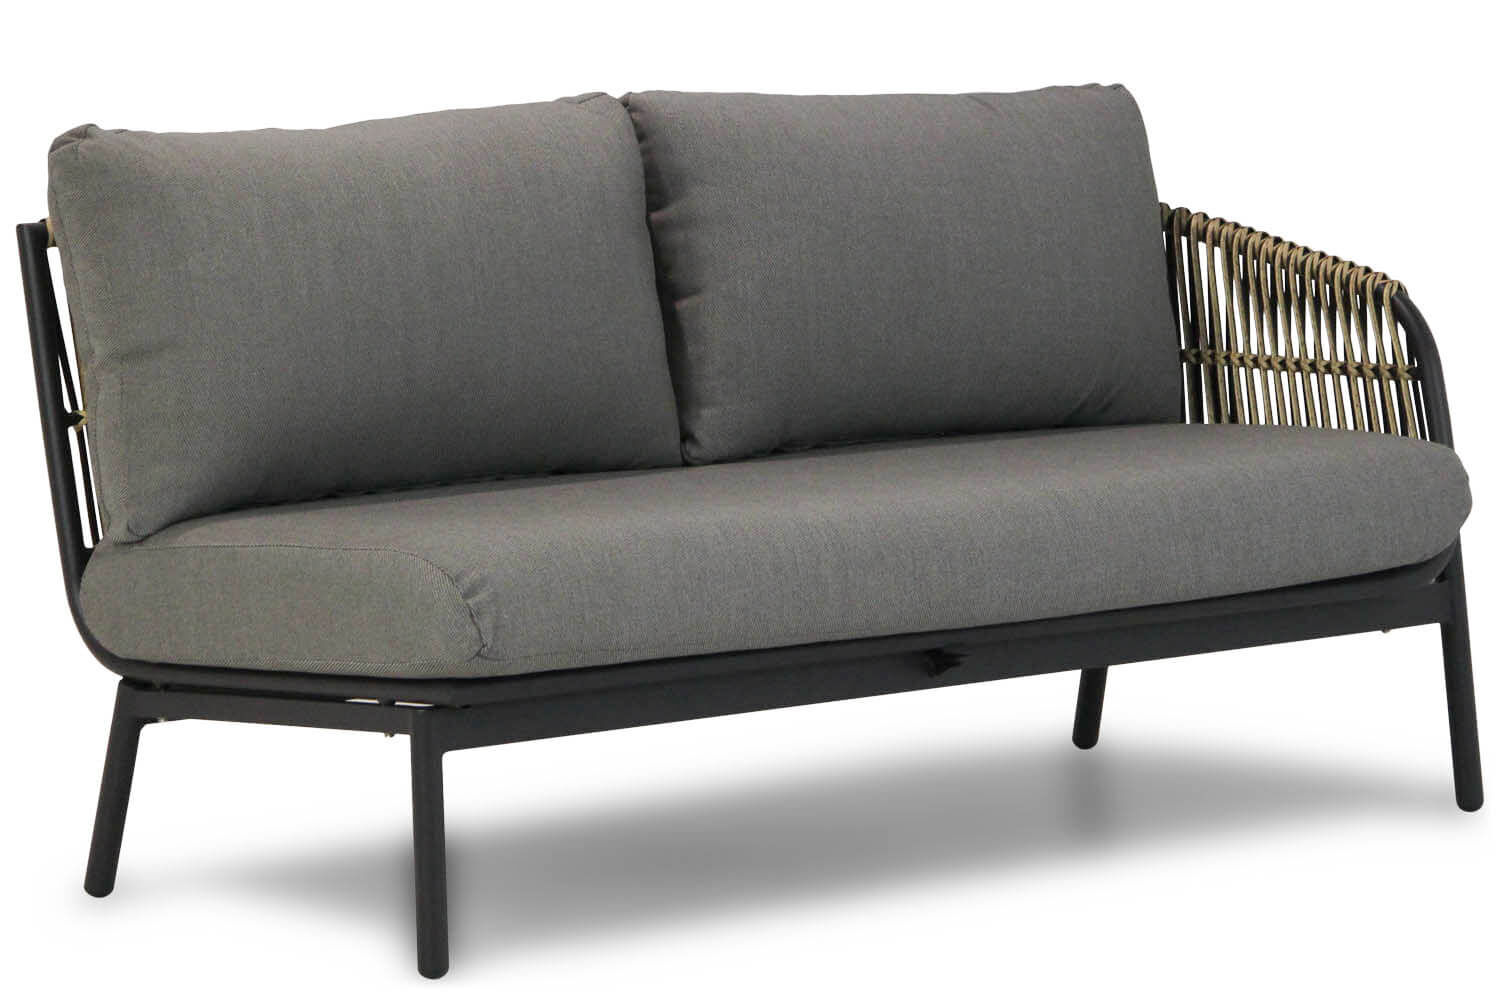 Coco Nathan/Pacific 100 cm hoek loungeset 4-delig